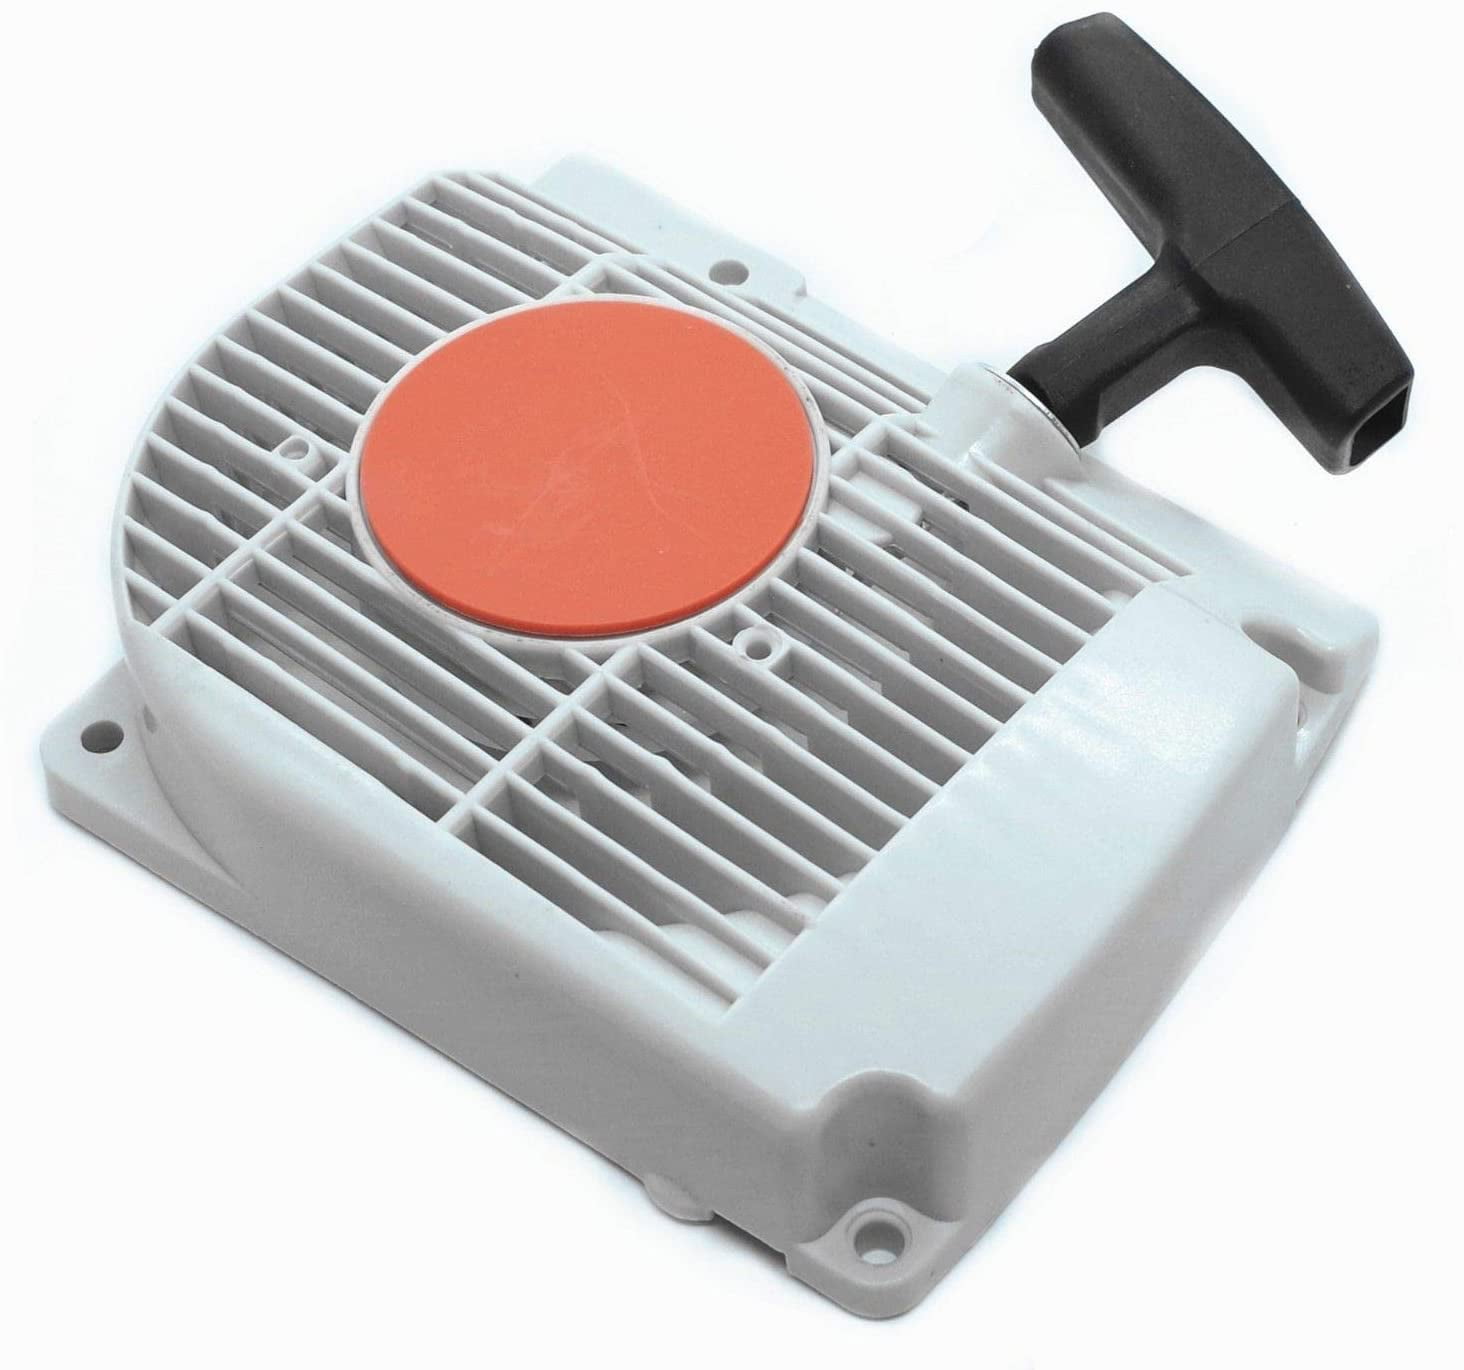 Recoil Pull Start Starter for Stihl 029 039 MS290 MS390 Chainsaw 1127 080 2103